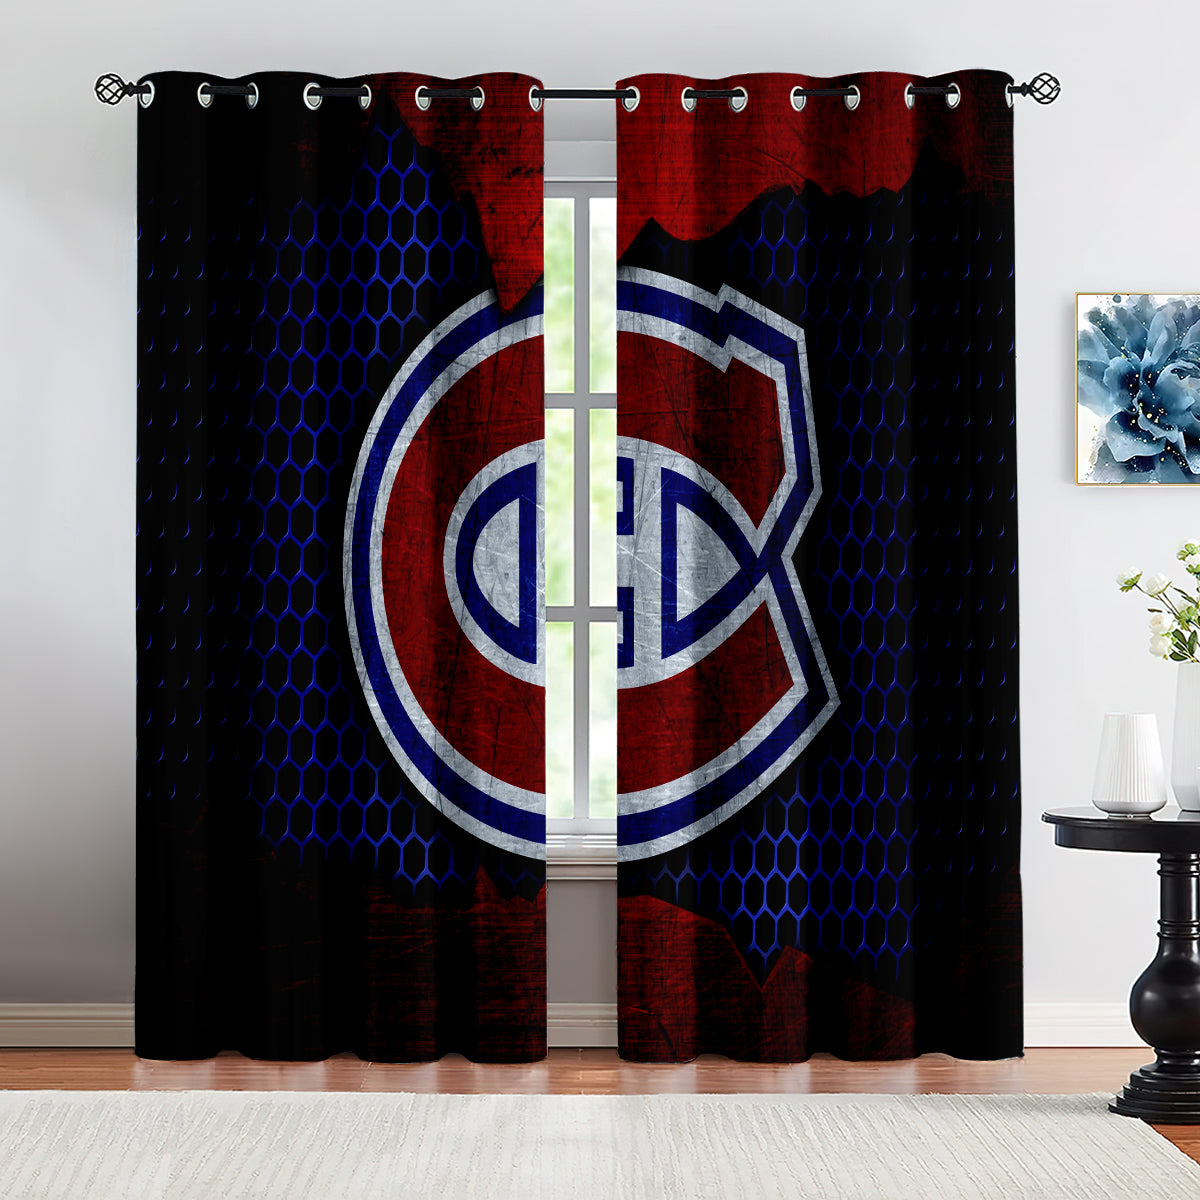 Montreal Canadiens Hockey League Blackout Curtains Drapes For Window Treatment Set